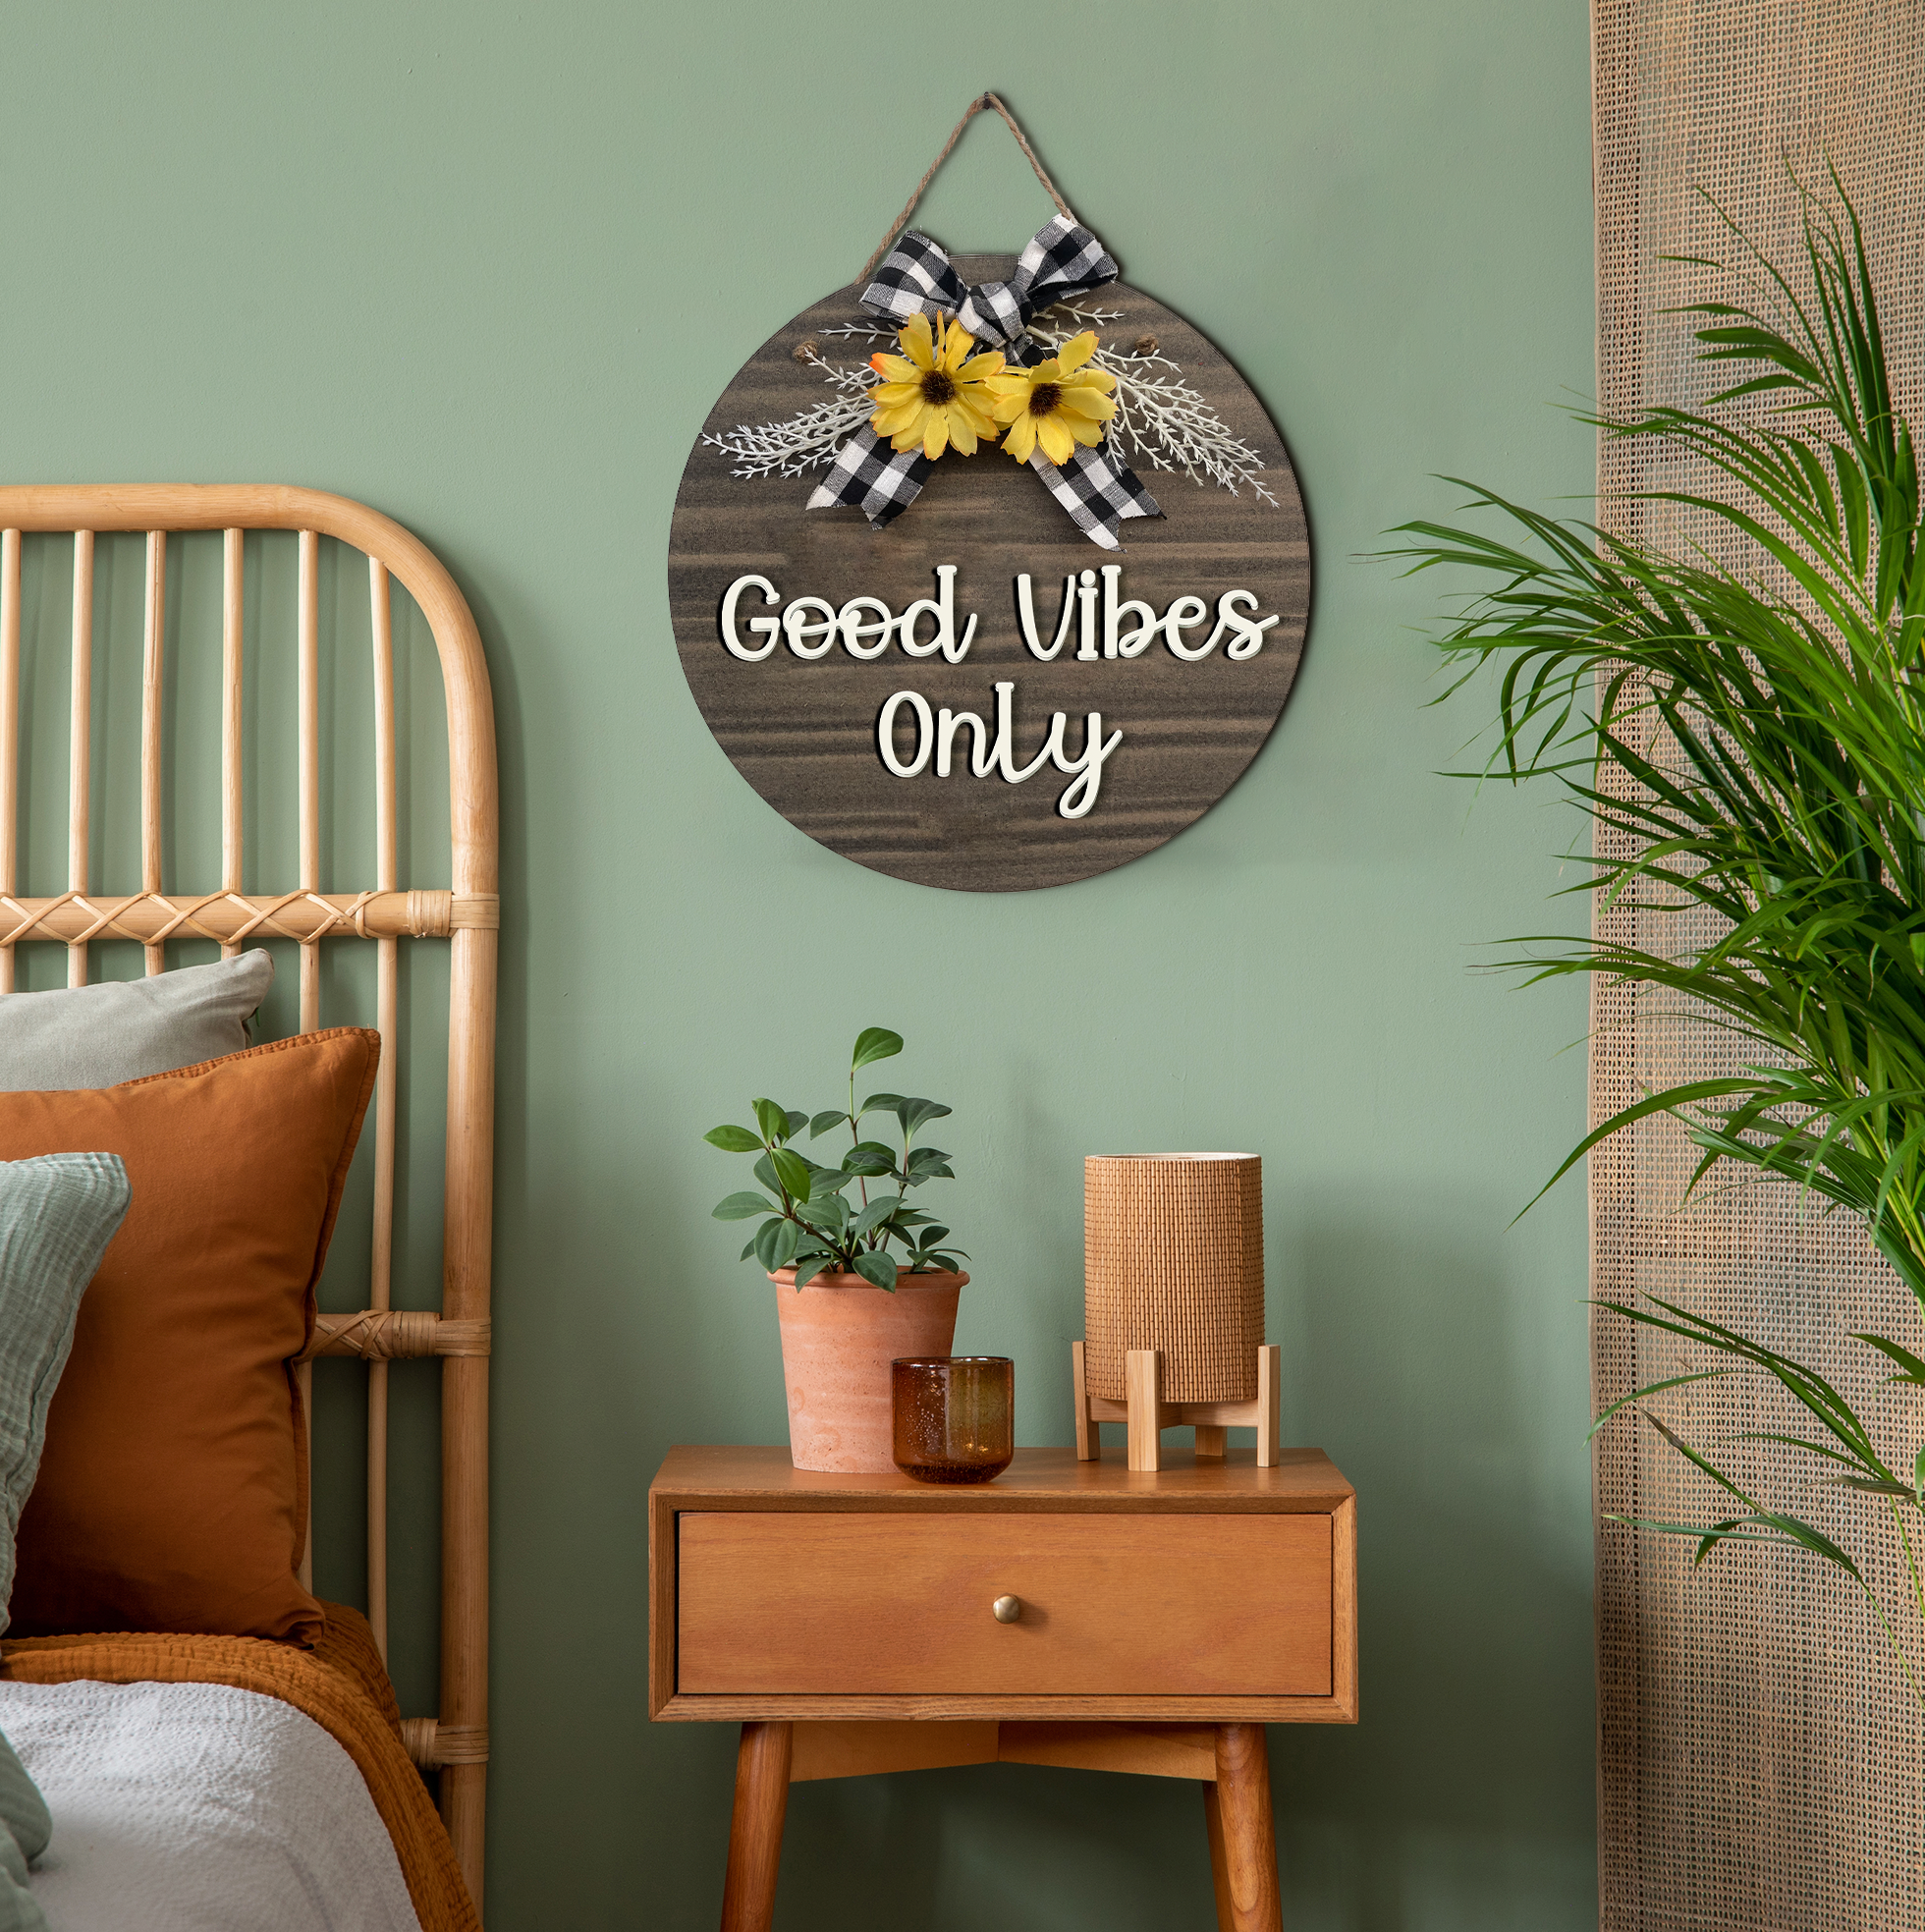 Good Vibes Only Wall Hanging Round Wooden Decorative Frame Board Plaque Art Wemy Store